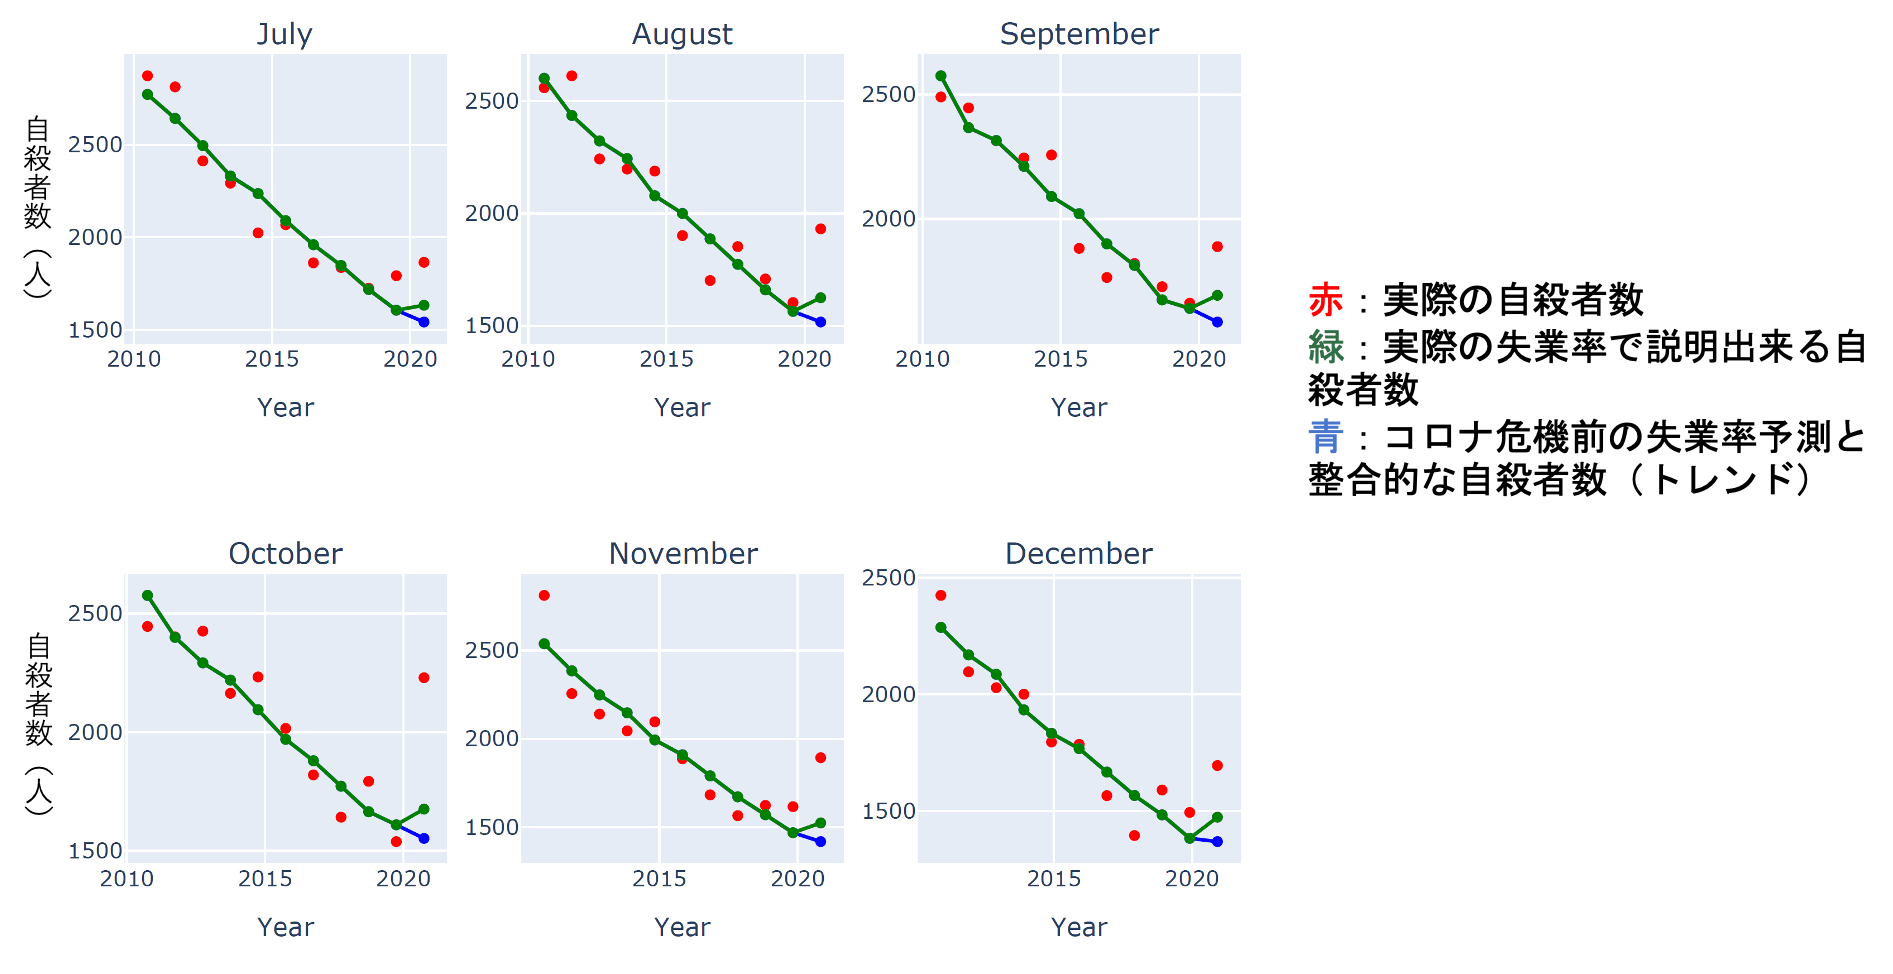 Actual Suicides and Pre-Covid Model Predictions (Monthly)